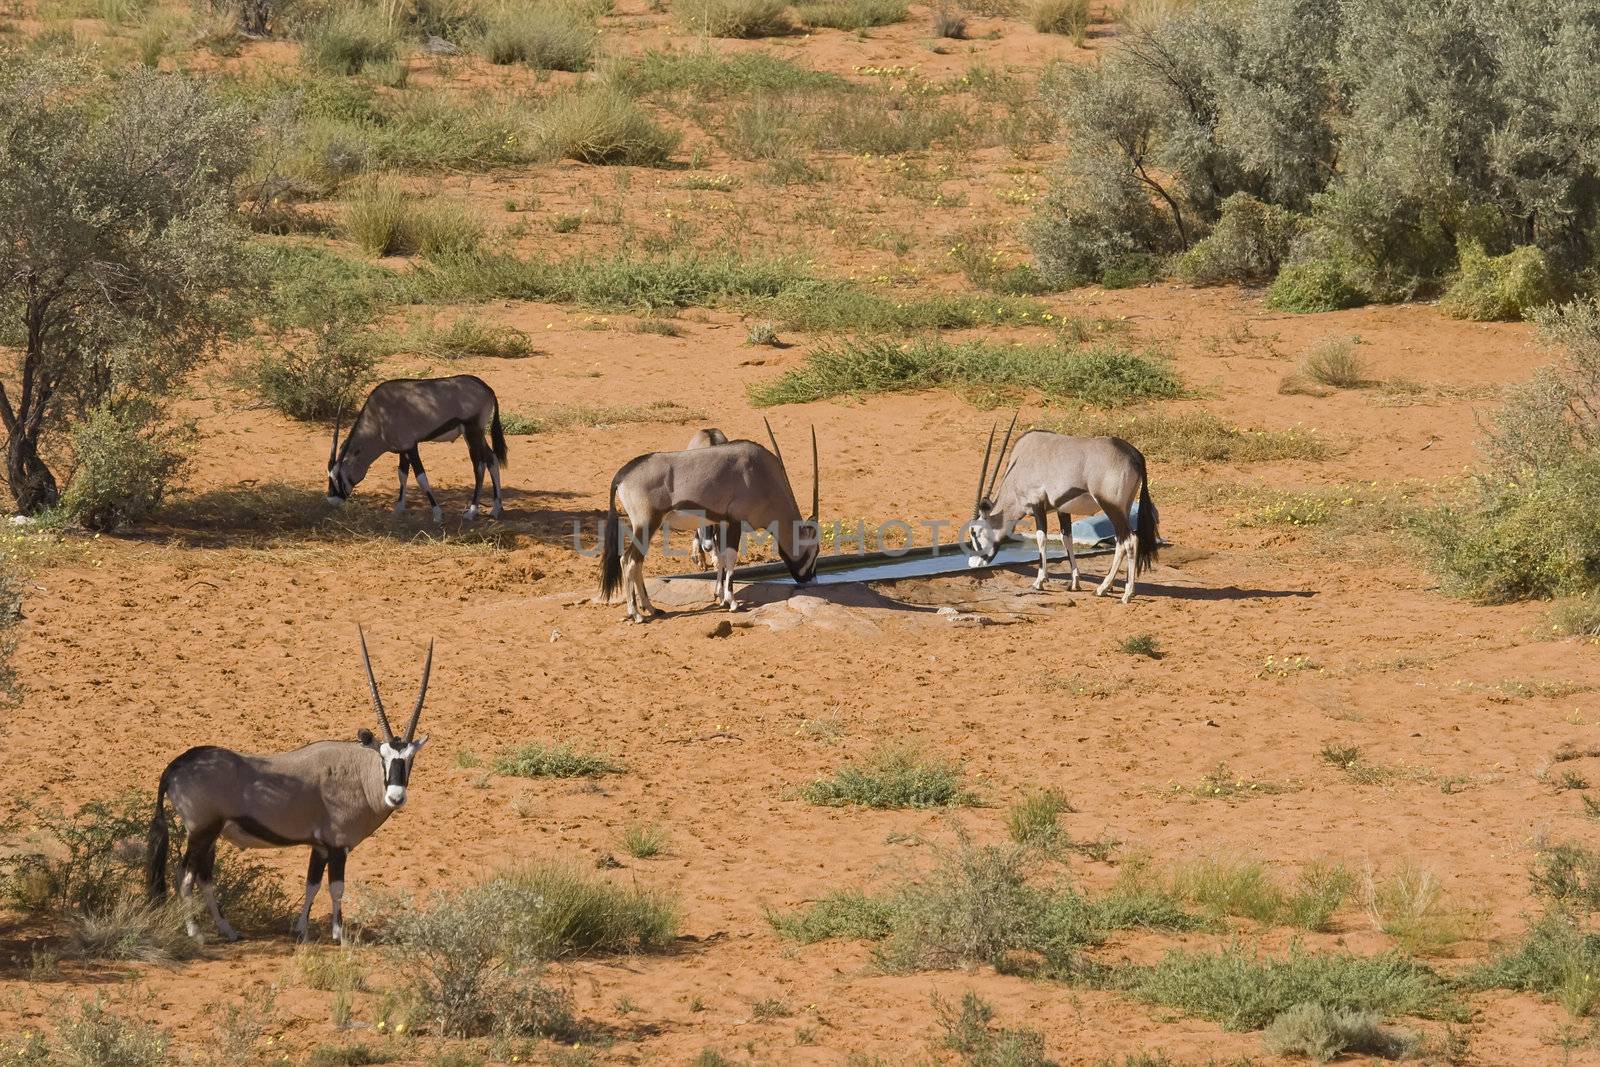 Gemsbok herd feed and drinking at a watering hole